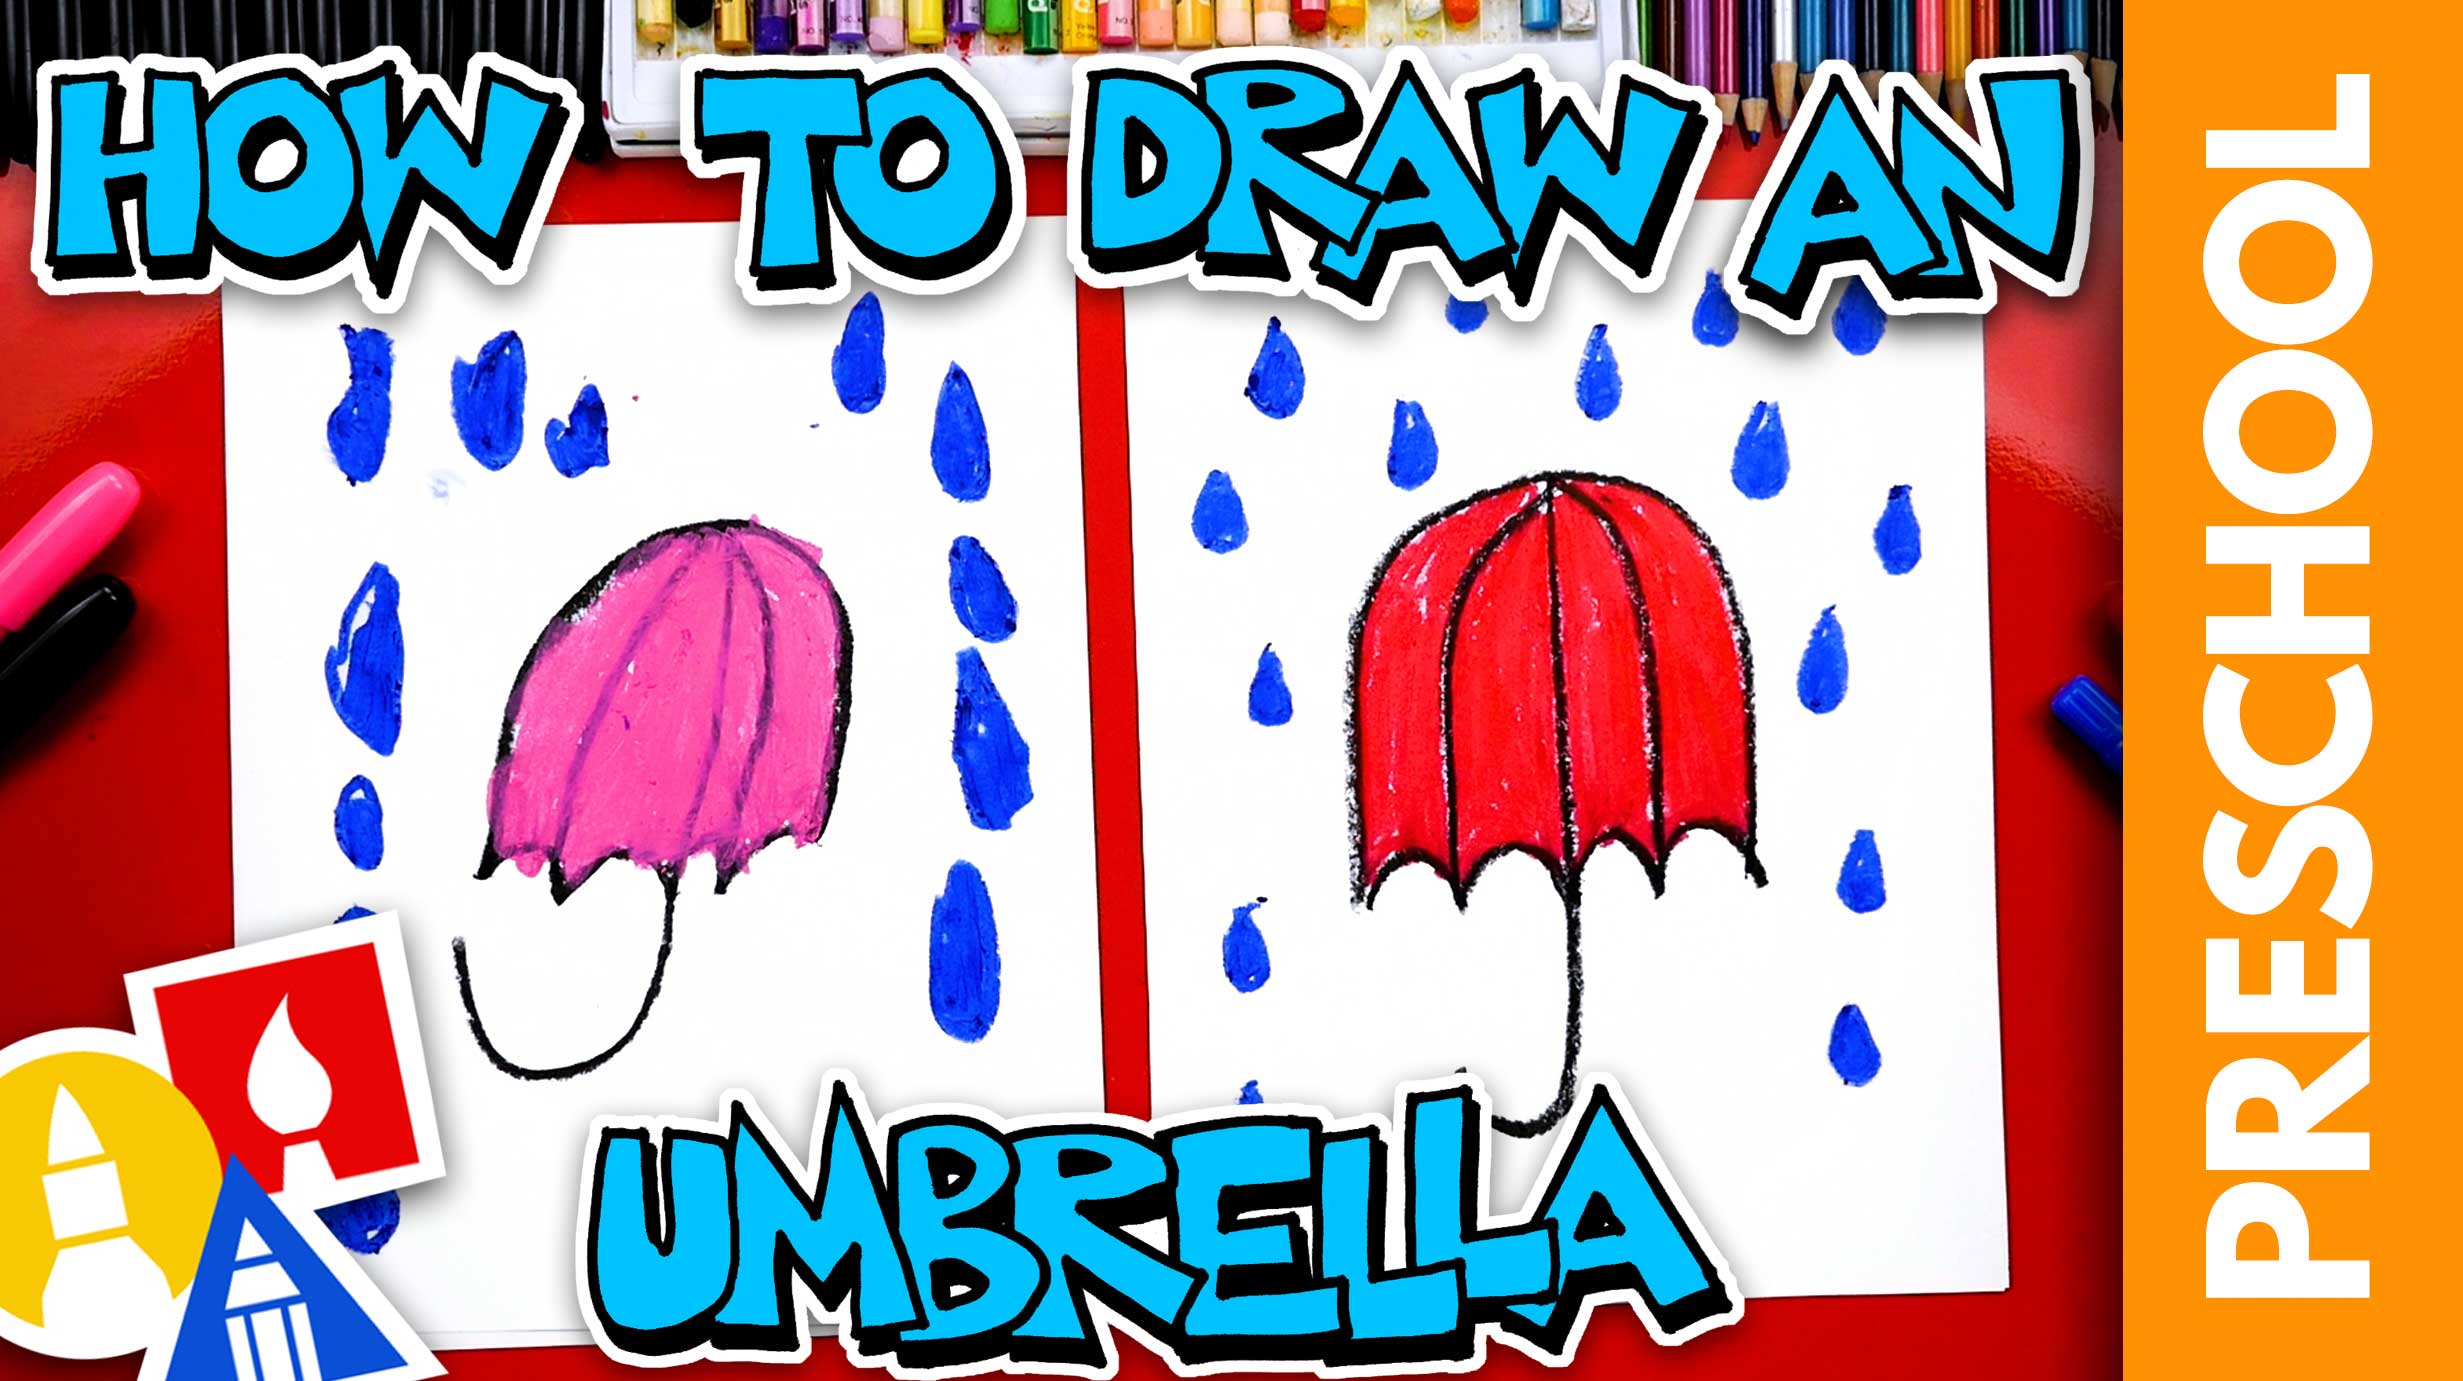 How to Draw a Cute Girl with Umbrella pencil sketch step b… | Flickr